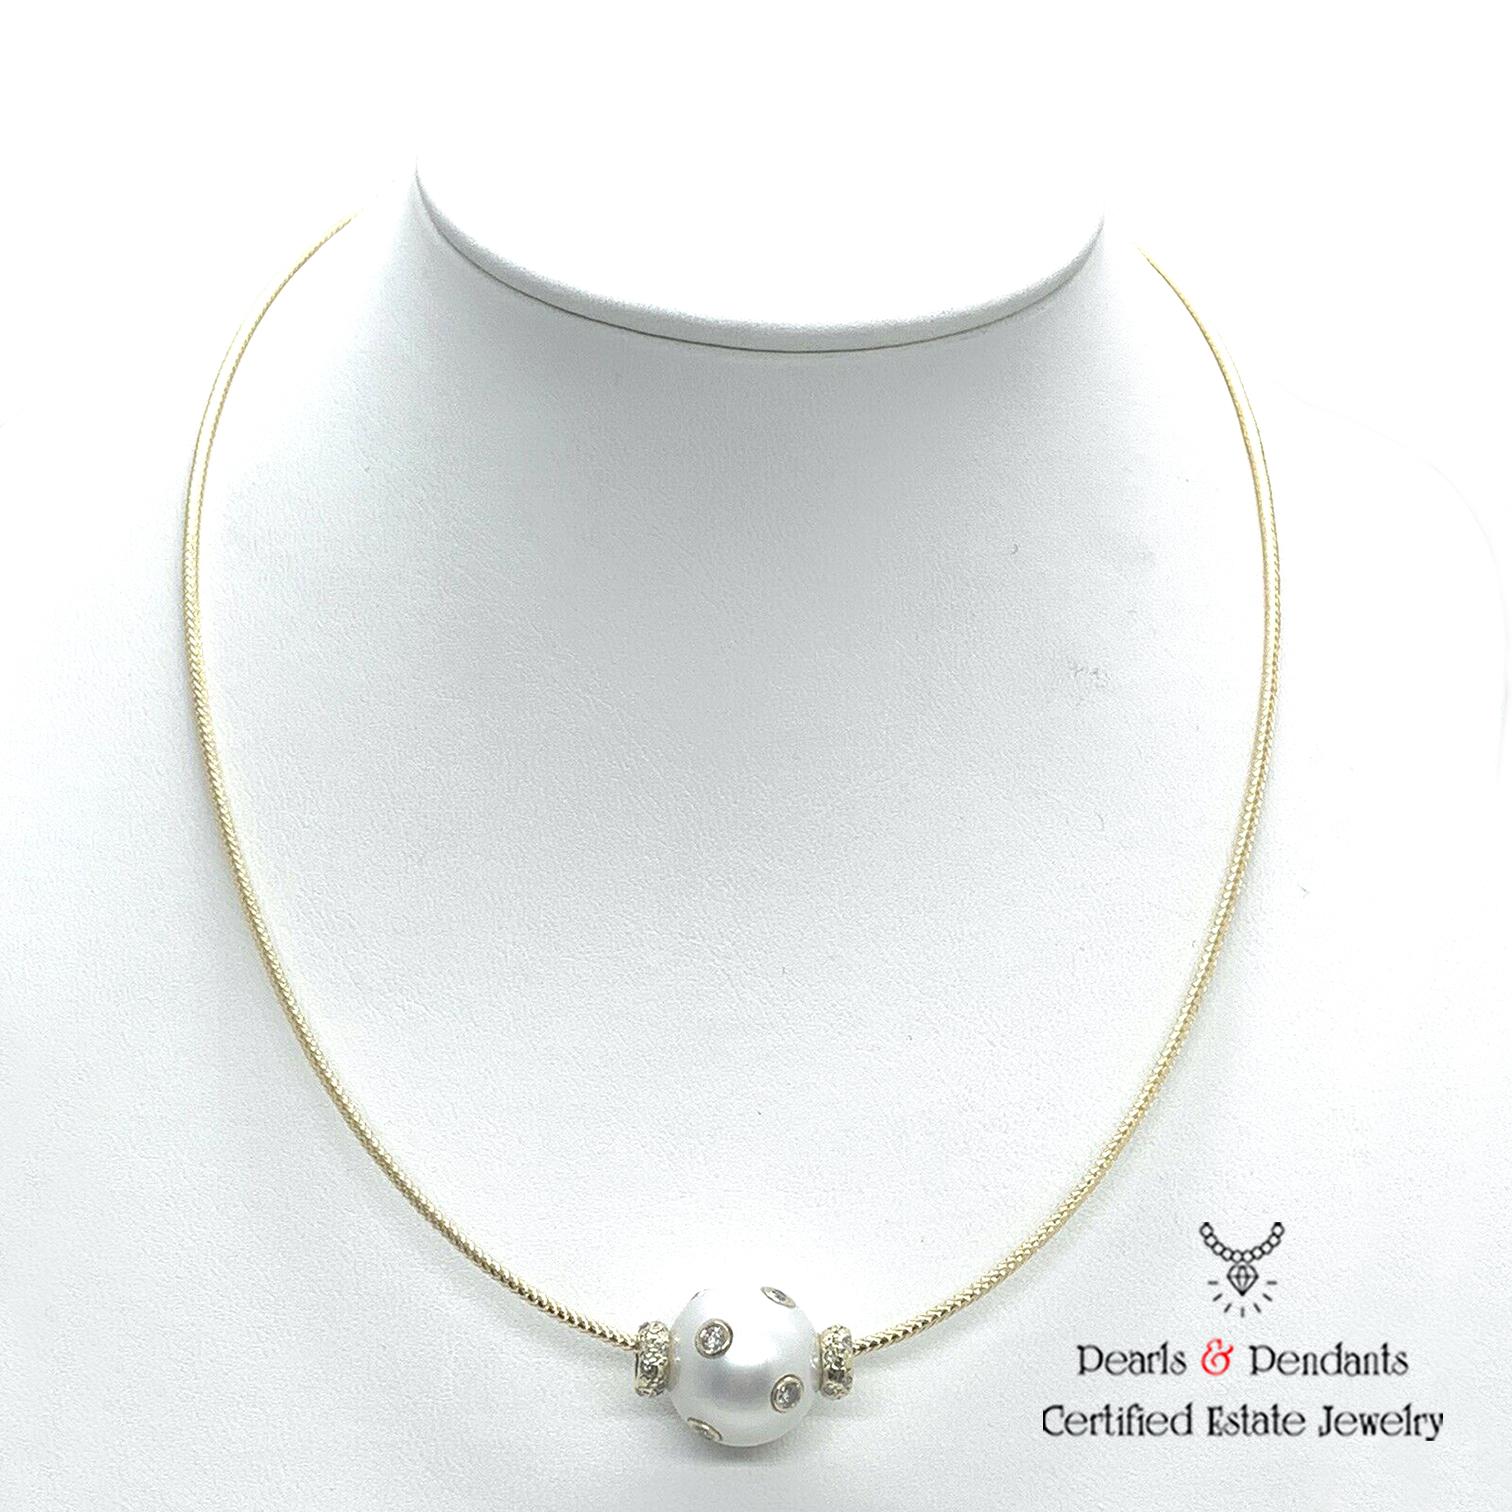 Fine Quality South Sea Pearl Diamond Necklace 13.80 mm 14k Gold Certified $3,950 920457

This is a Unique Custom Made Glamorous Piece of Jewelry!

Nothing says, “I Love you” more than Diamonds and Pearls!

This South Sea pearl necklace has been